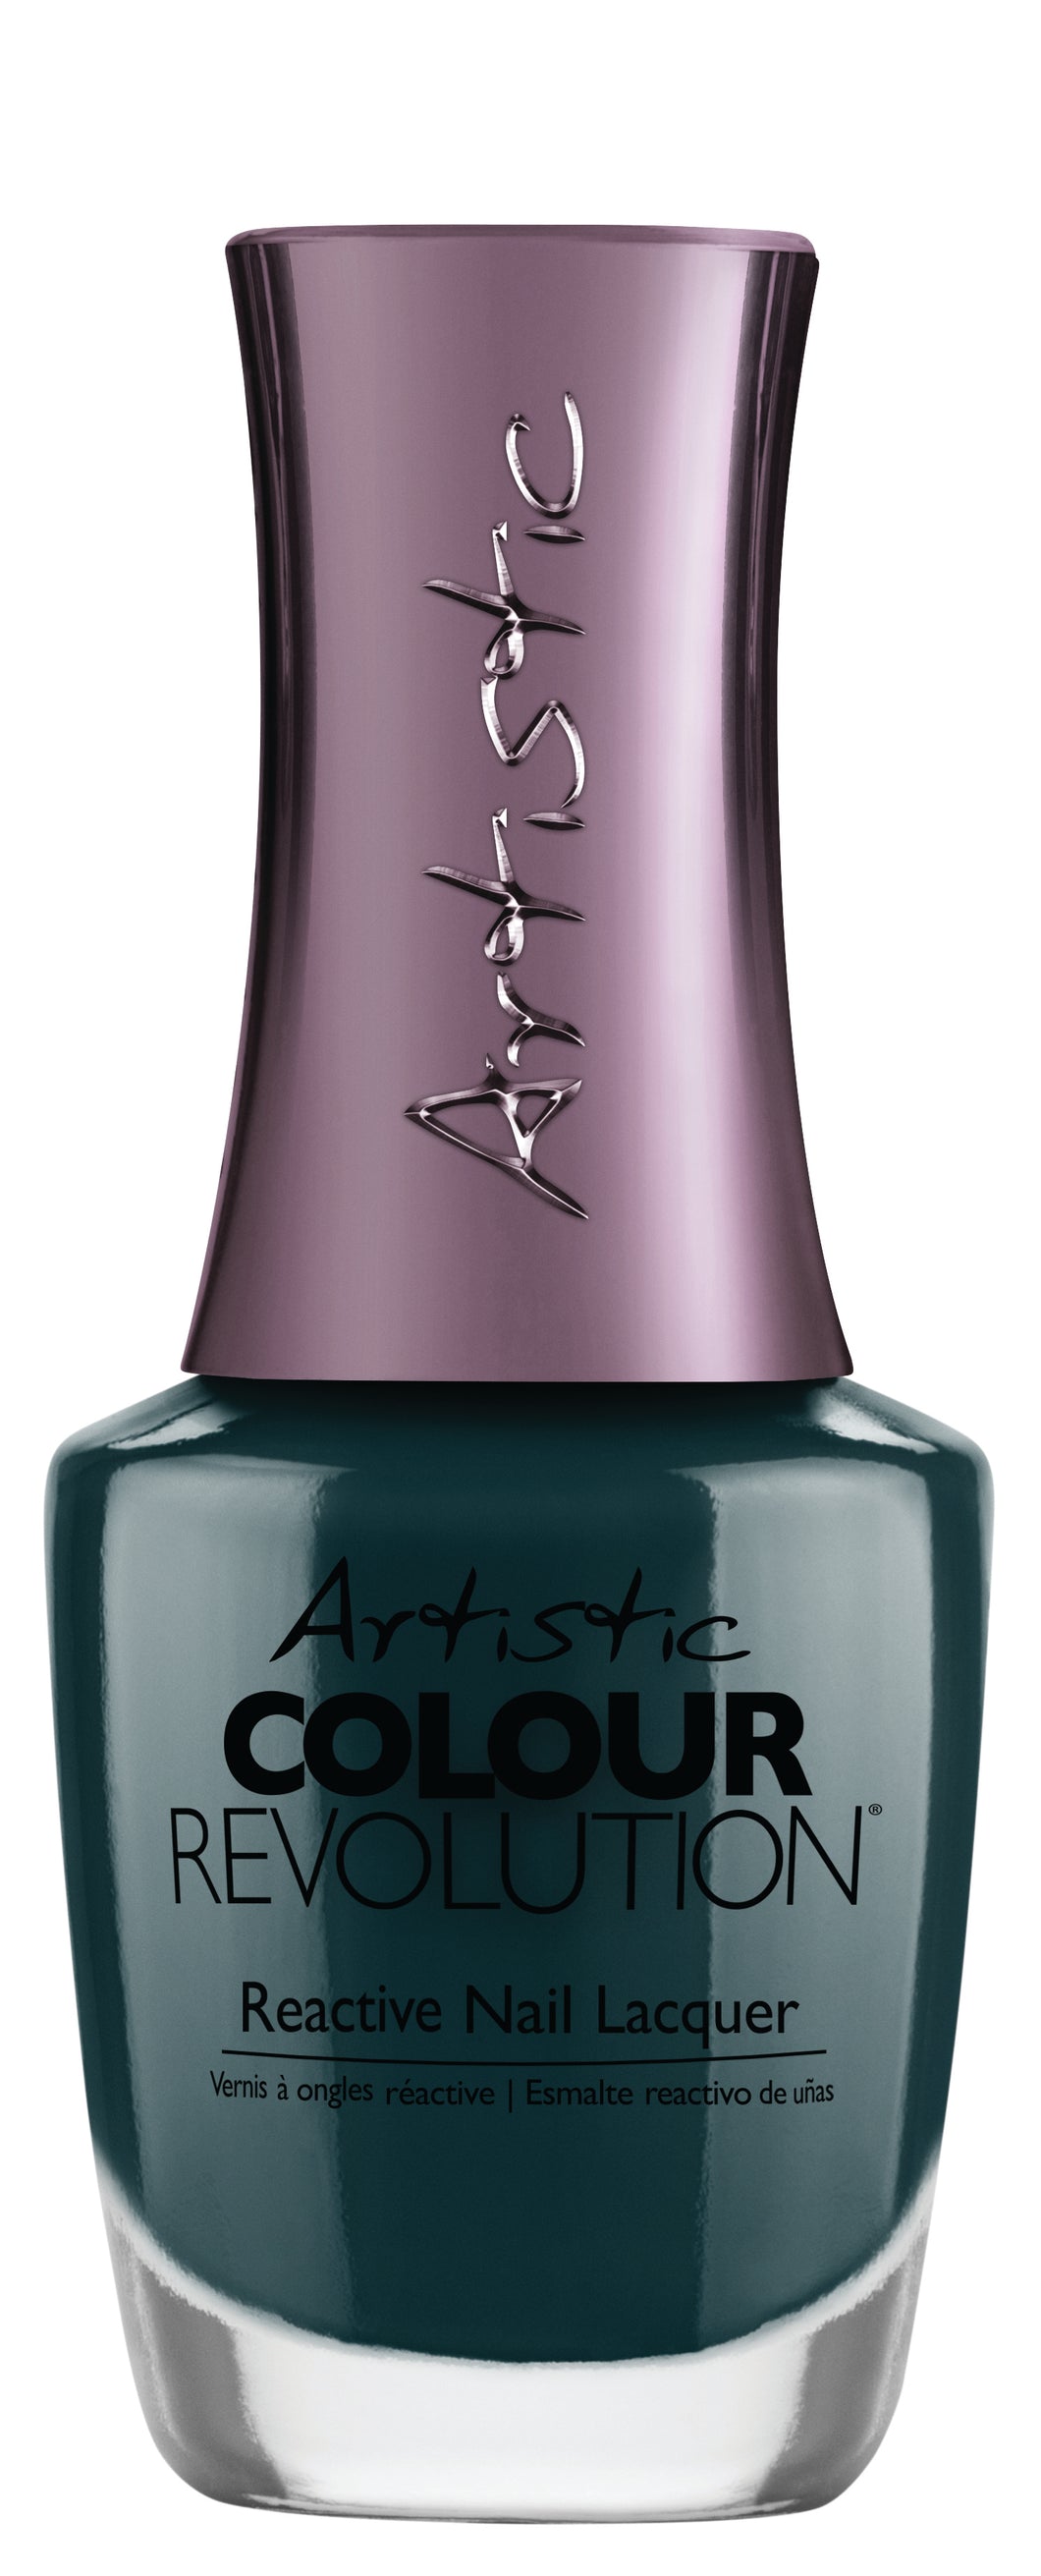 BE BOLD - TEAL CREME - LACQUER - Professional Salon Brands